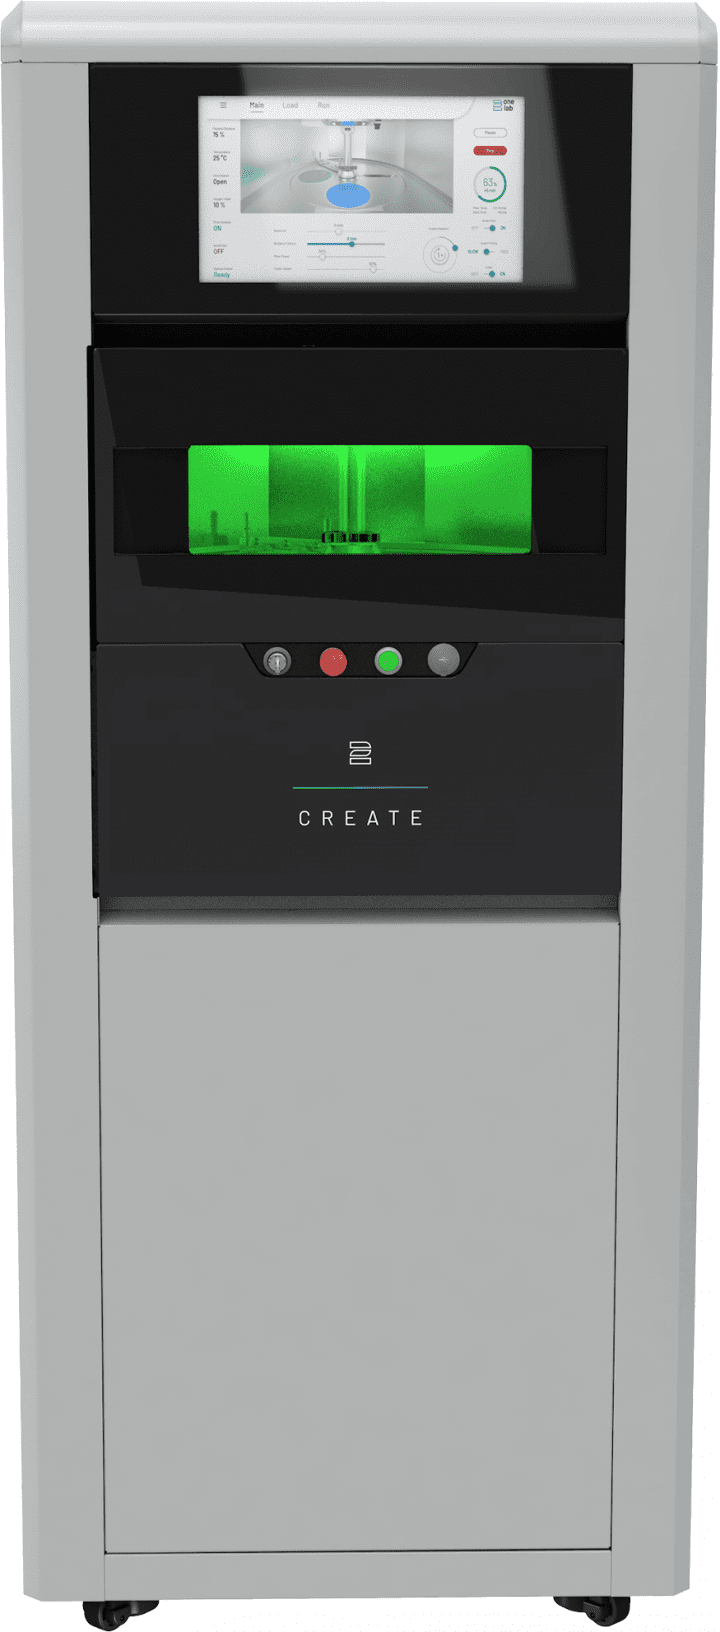 Image of 2CREATE laser powder bed fusion metal 3D printer by 2onelab